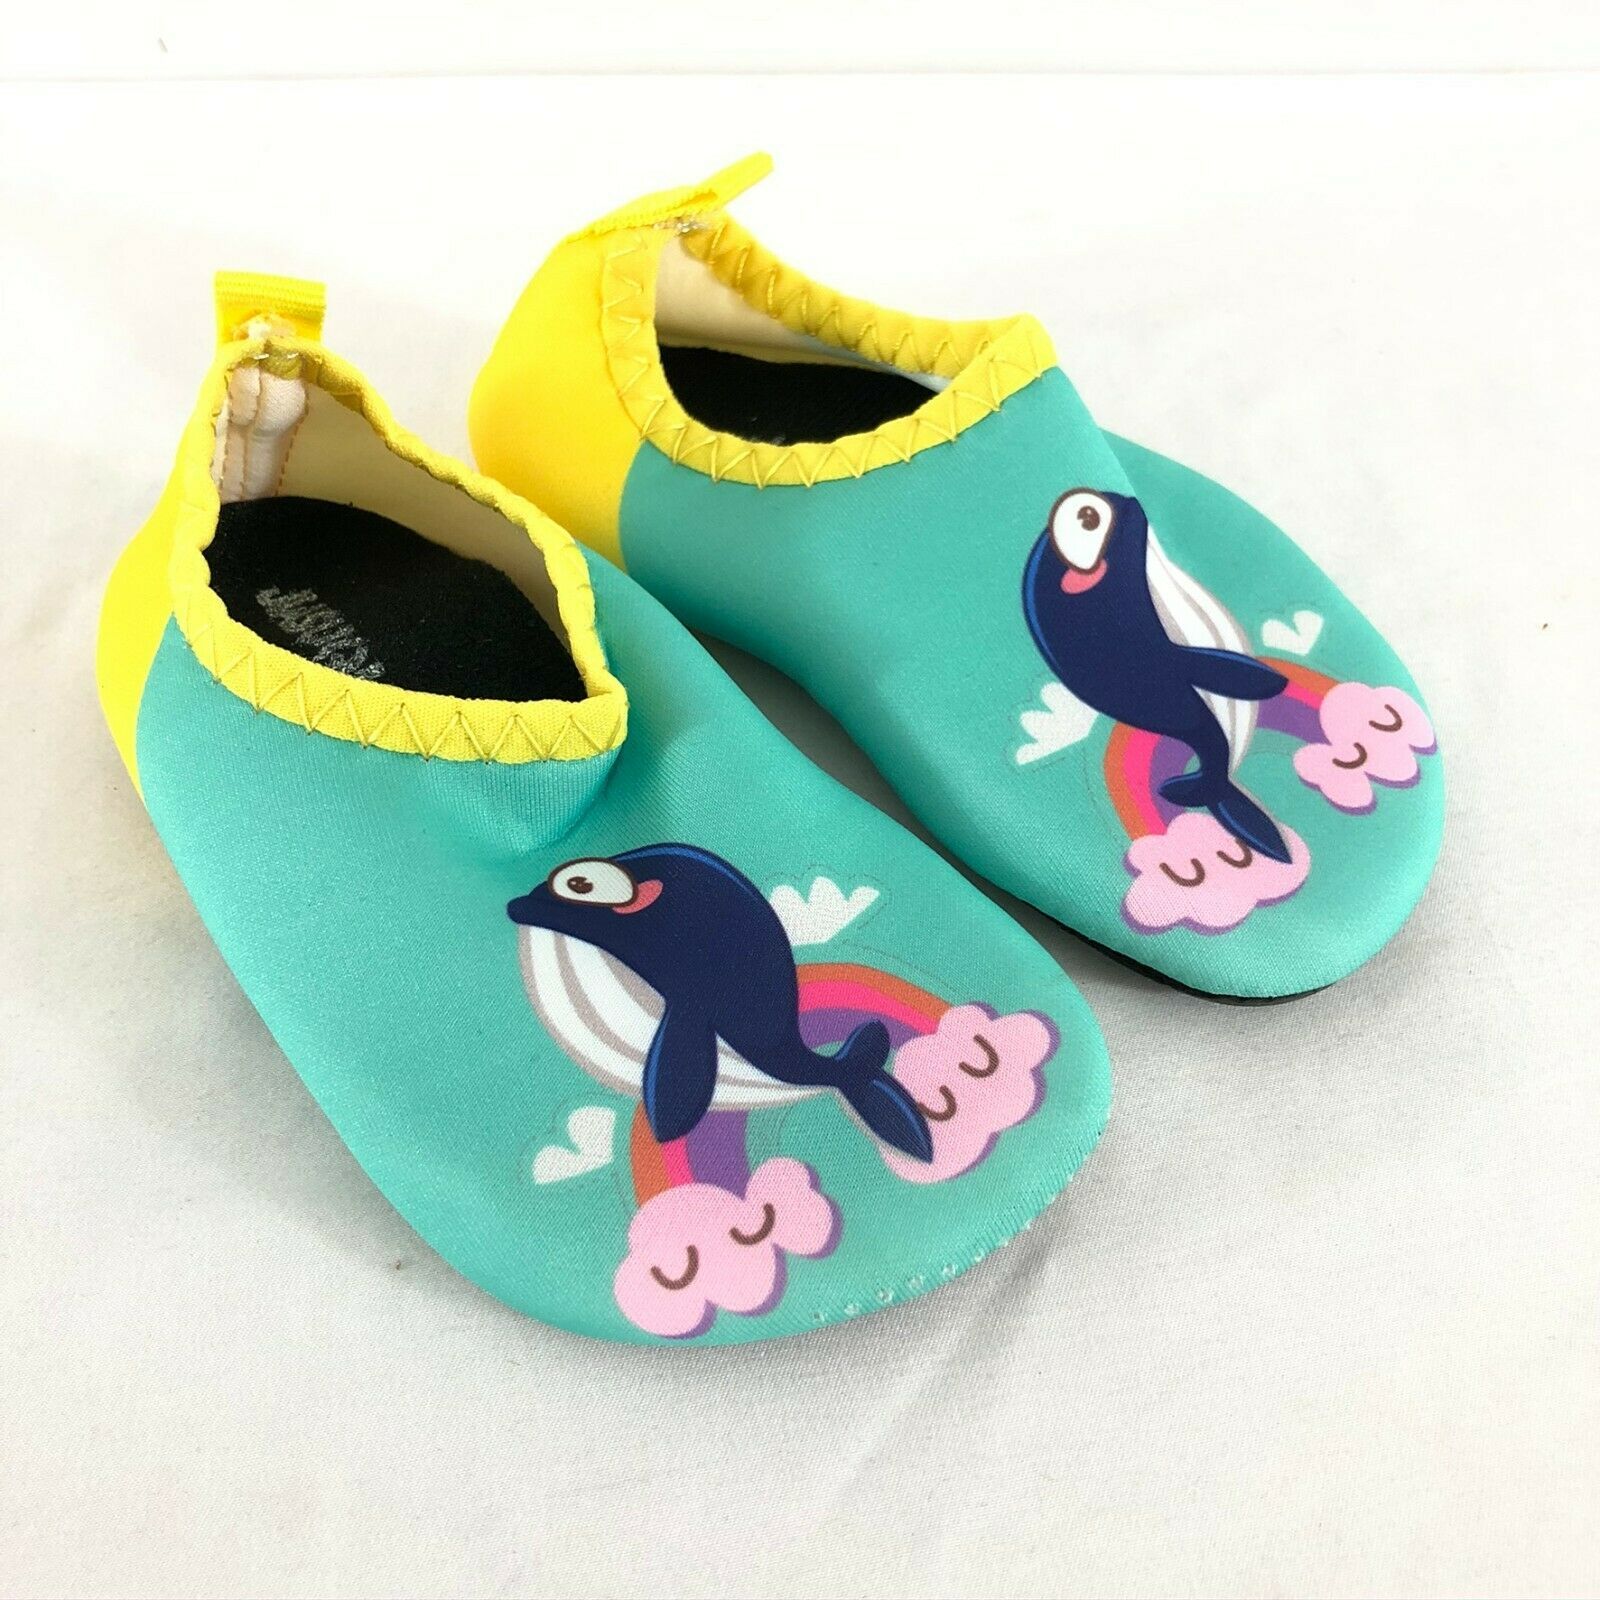 Toddler Girl Water Shoes Slip On Fabric Lightweight Dolphin Green 21/22 US 5-6 - $9.74